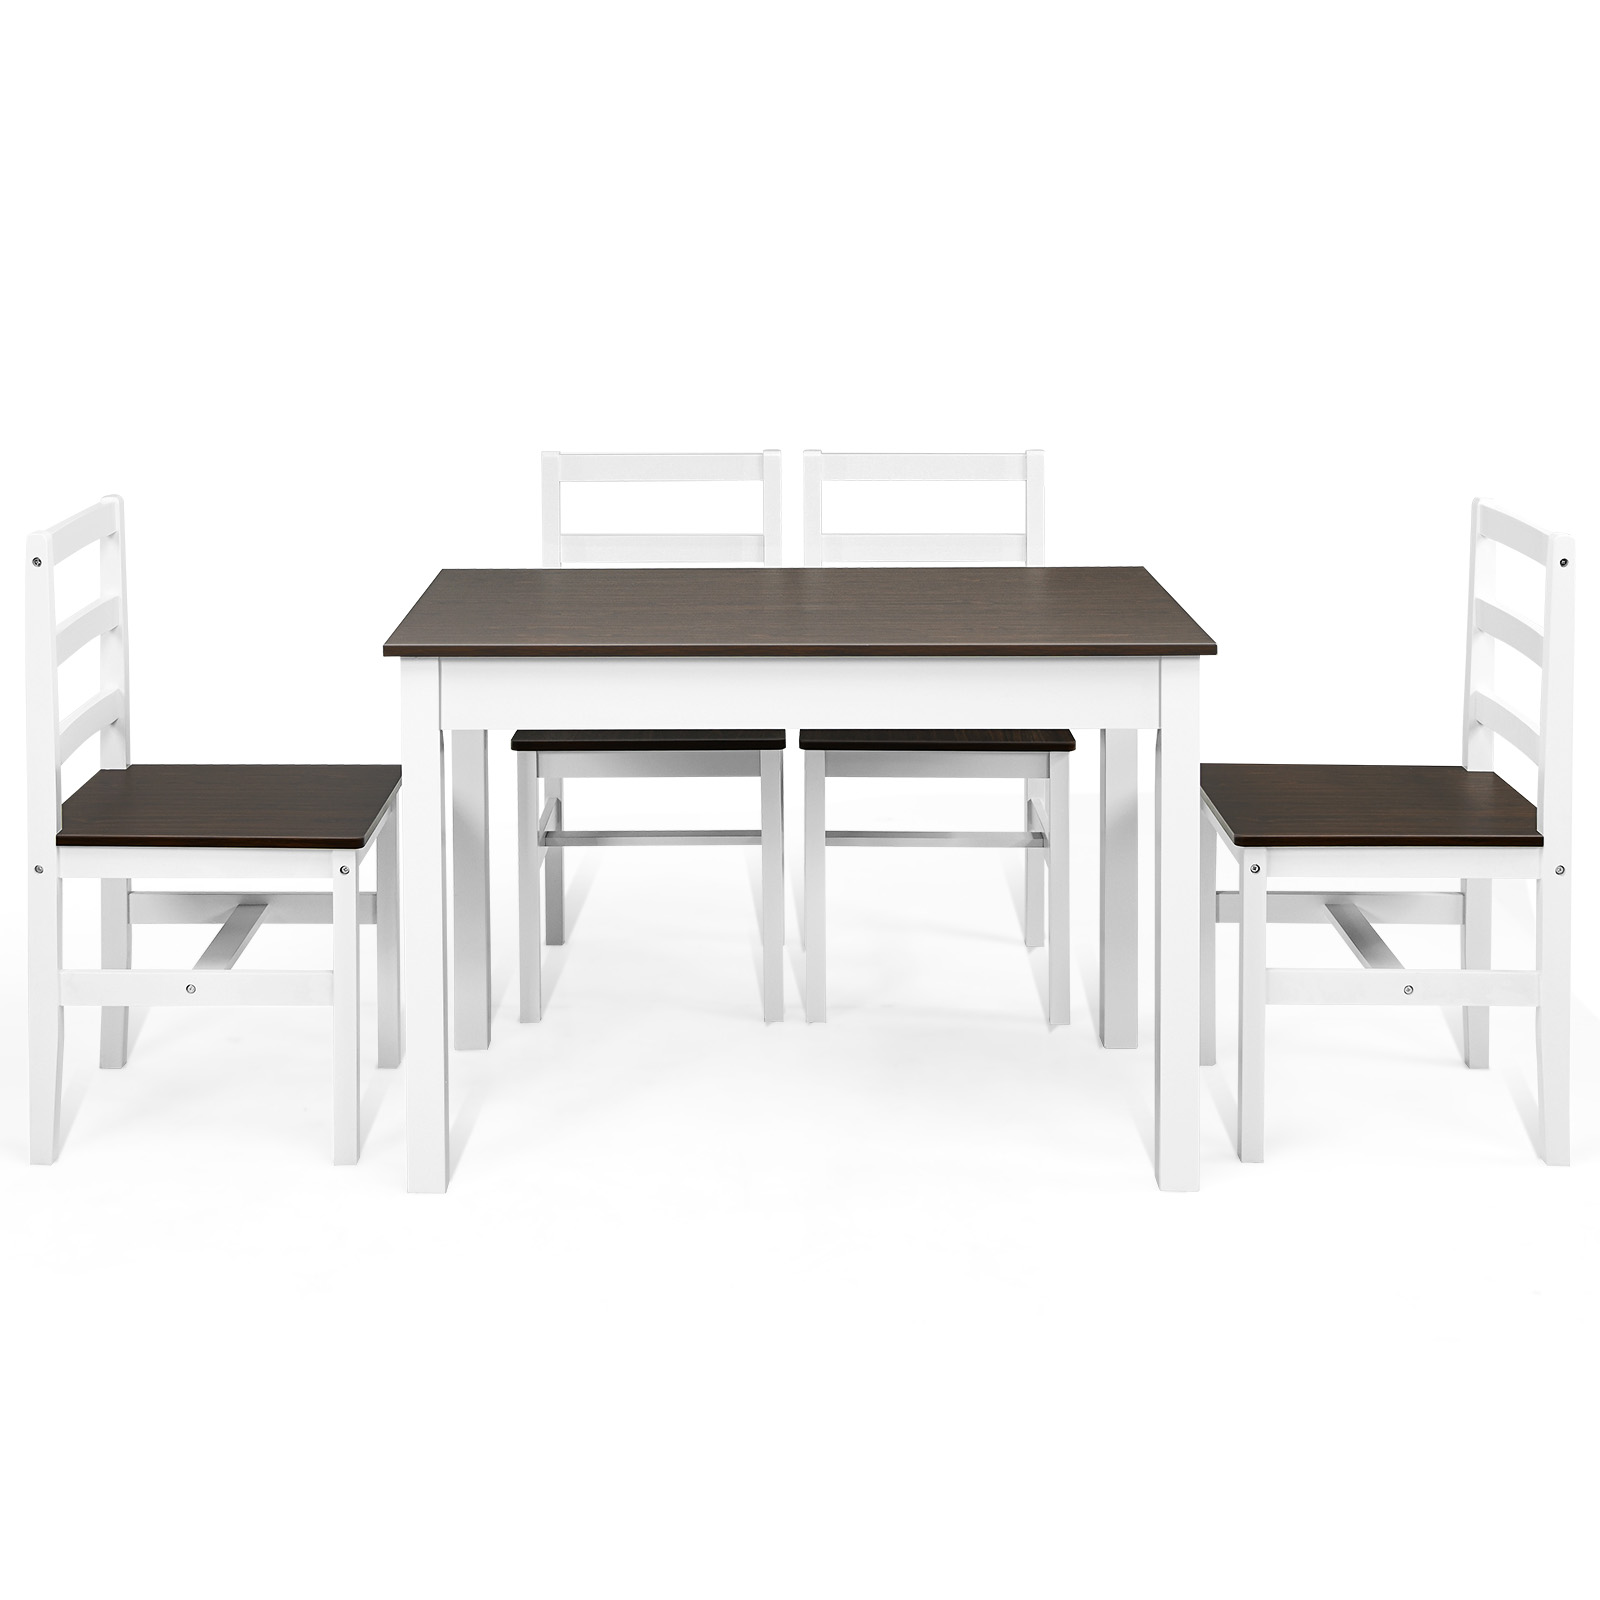 Modern Table and Chairs Set with Solid Pine Wood Legs for Dining Room